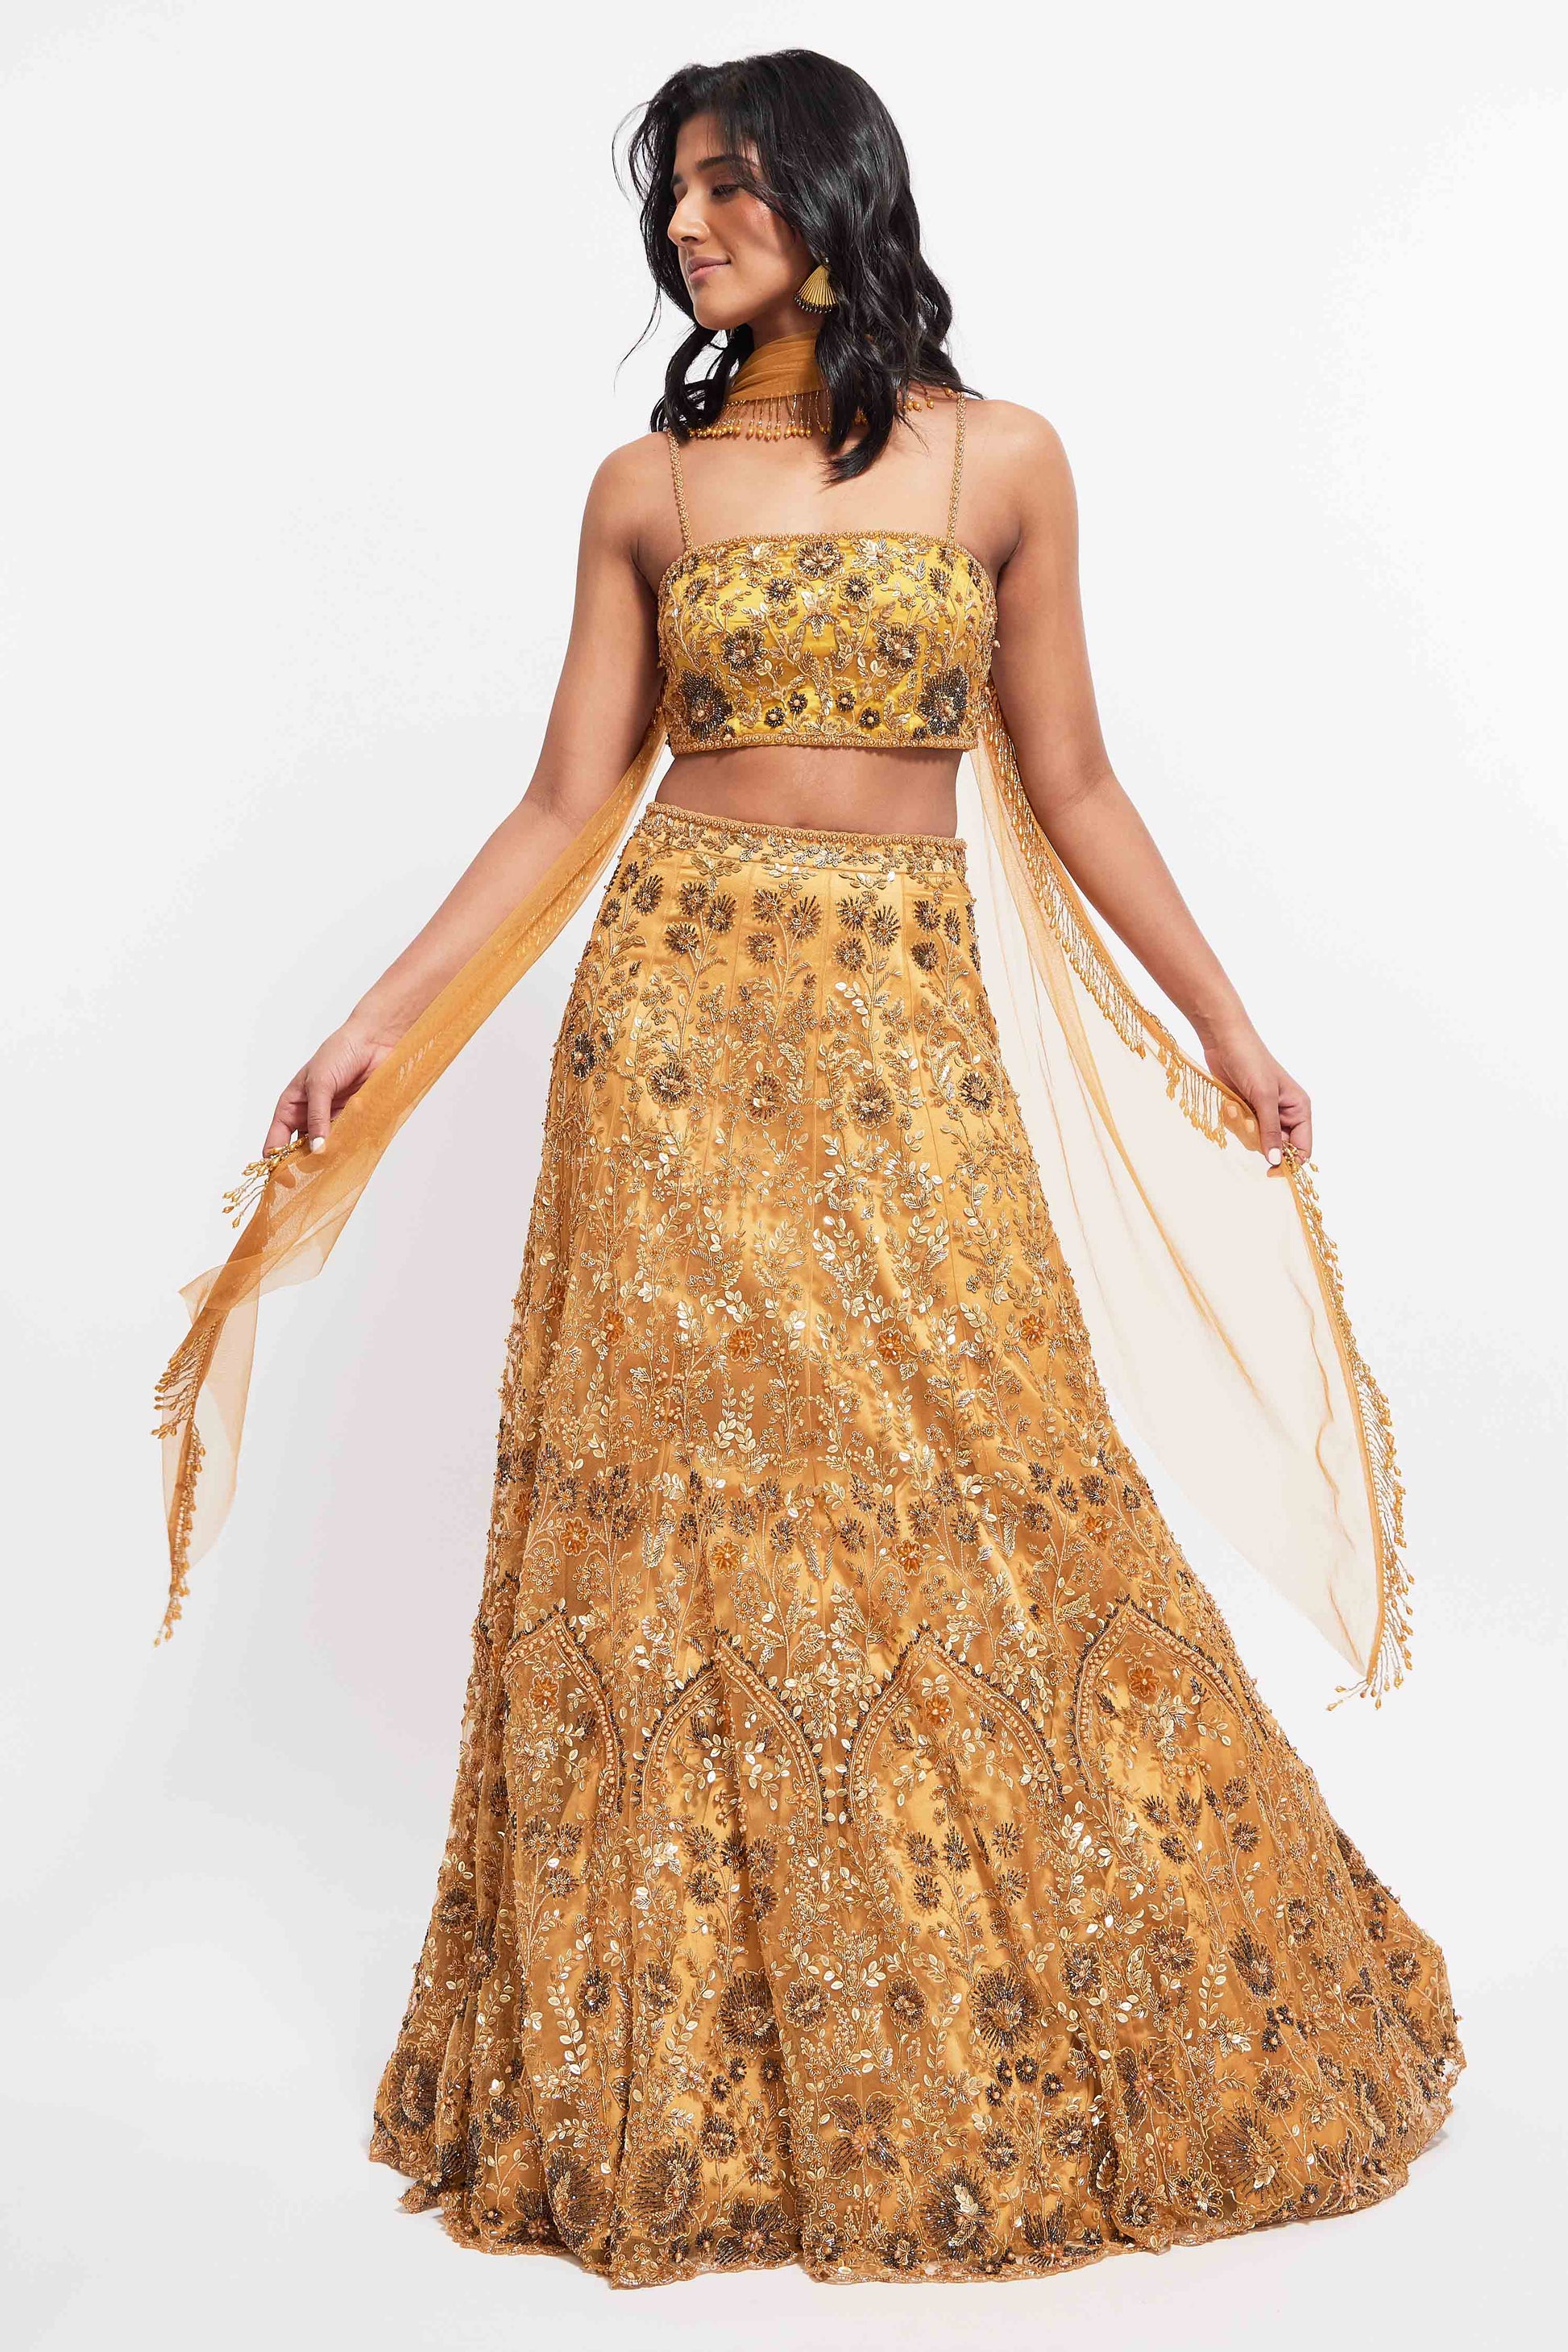 The Hasina Lehenga showcases intricate three-dimensional embroidery, comprising crystal, sequin, and beadwork in an ornate floral pattern adorning both the blouse and skirt. It is elegantly complemented by a matching skinny dupatta with beaded tassels.